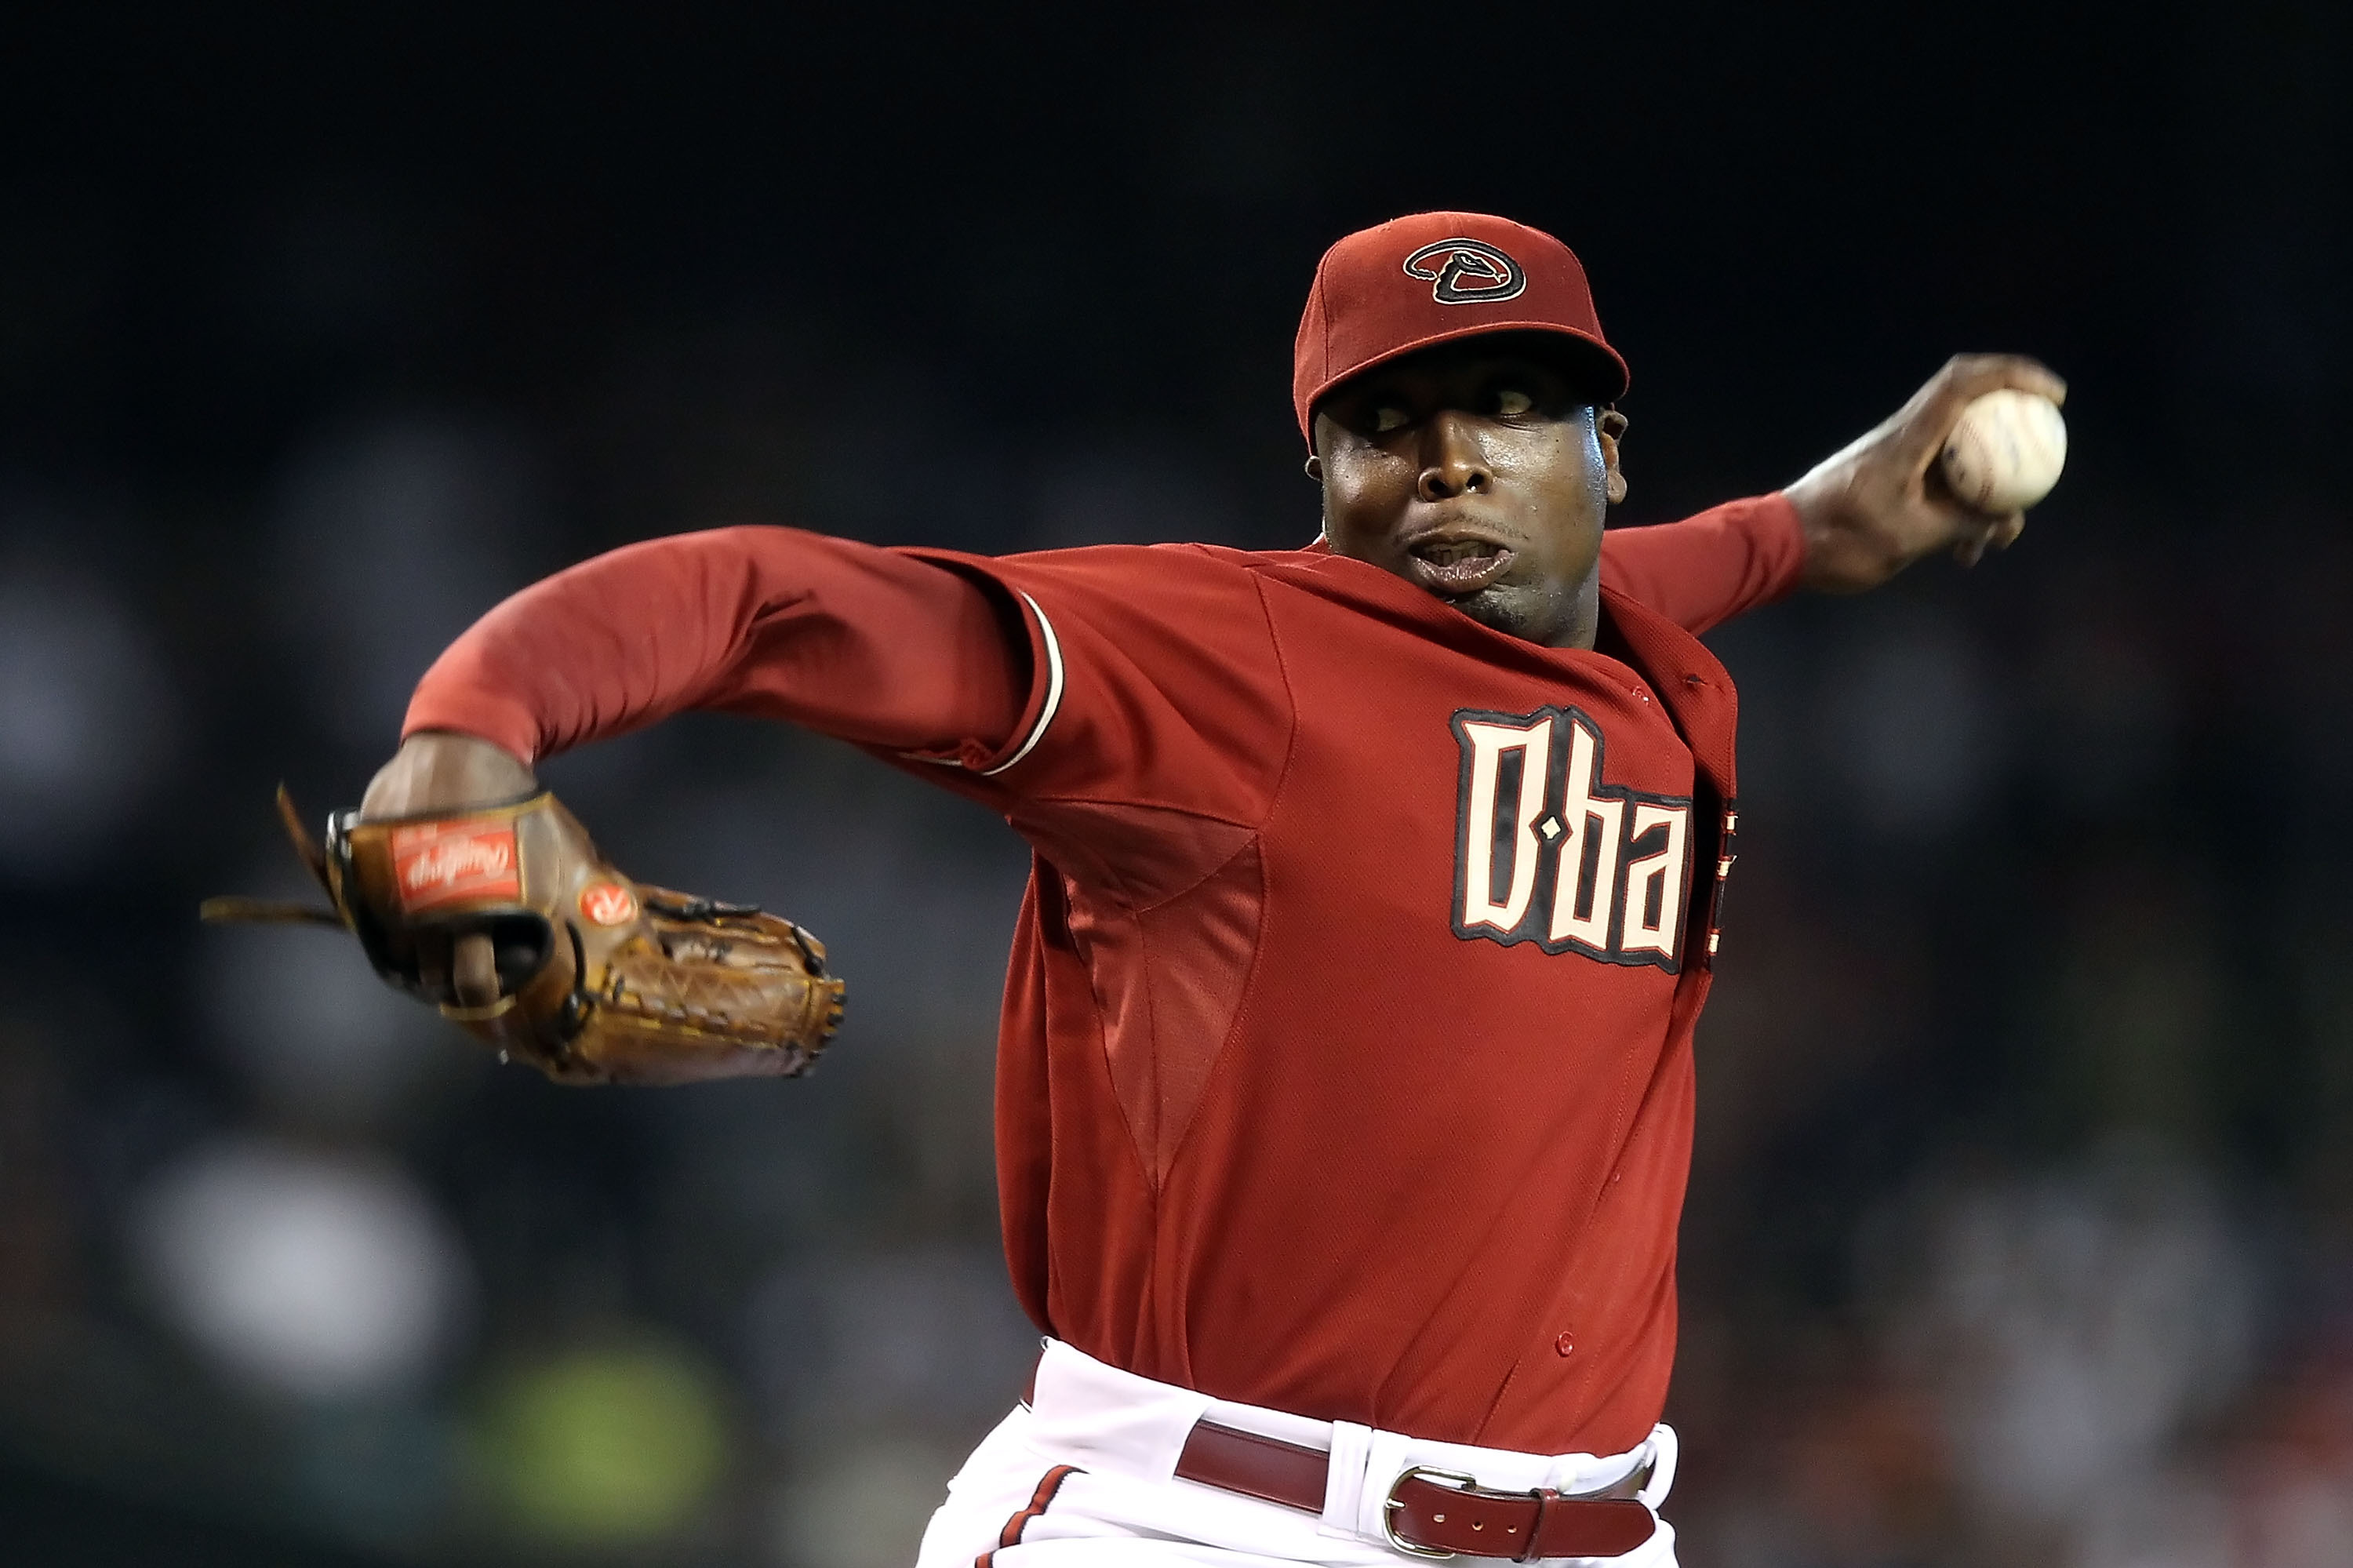 Dontrelle Willis to Retire: Latest Details, Comments and Reaction